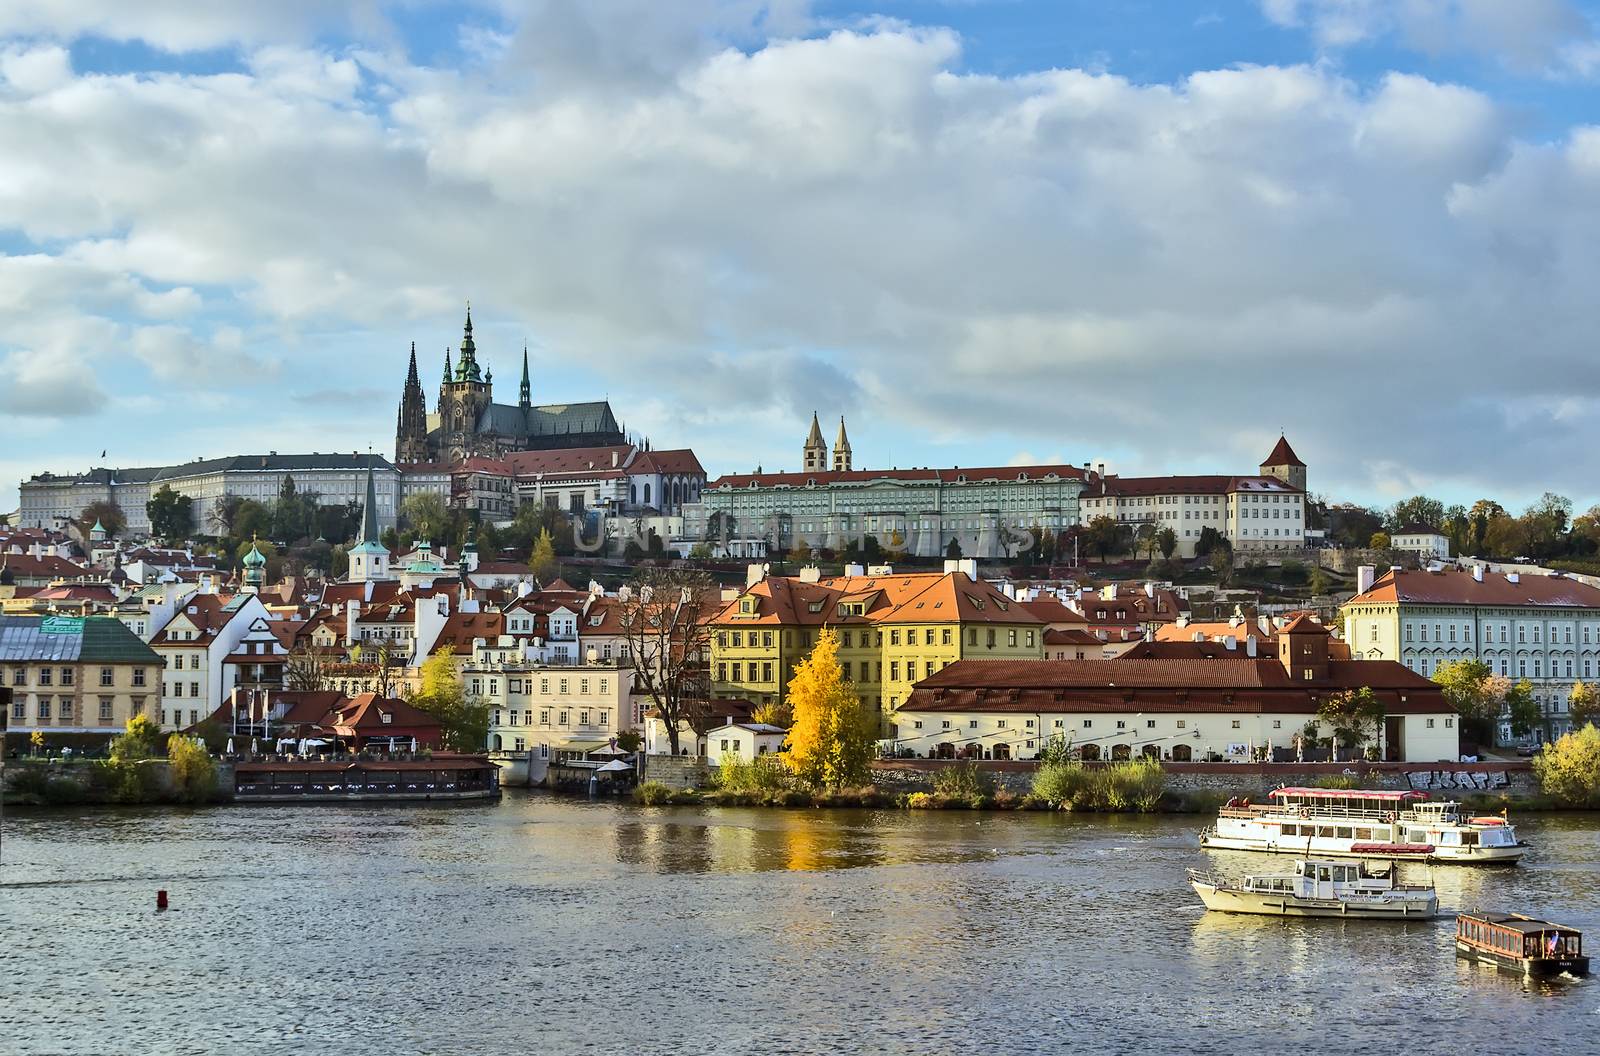 view on Prague castle from Charles Bridge